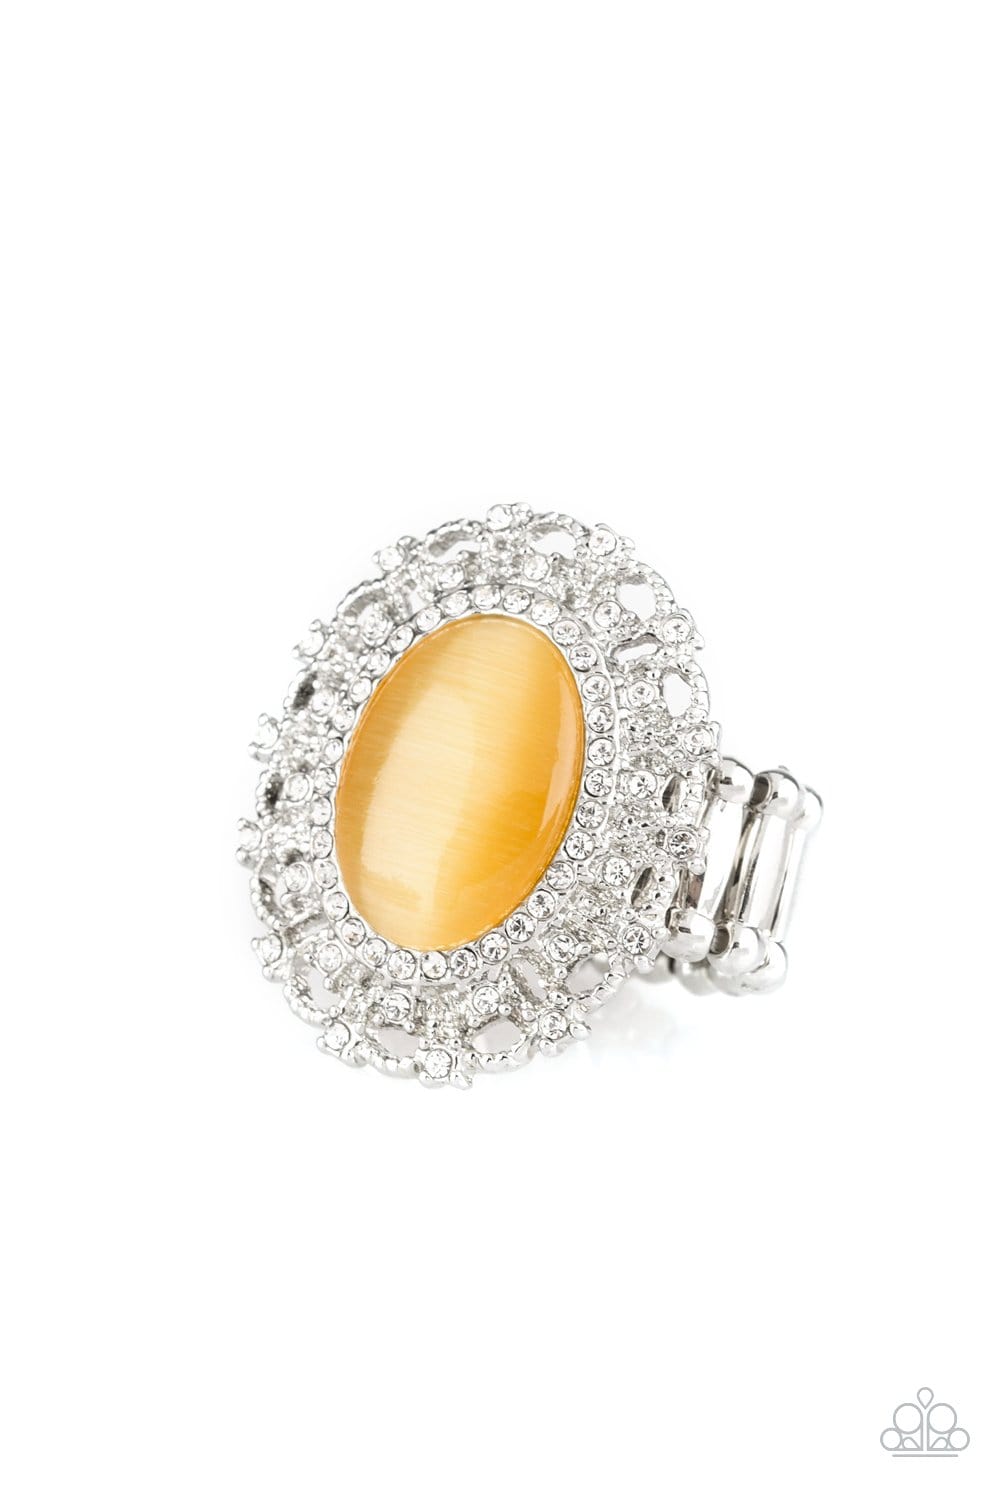 BAROQUE The Spell - Yellow - Paparazzi Ring